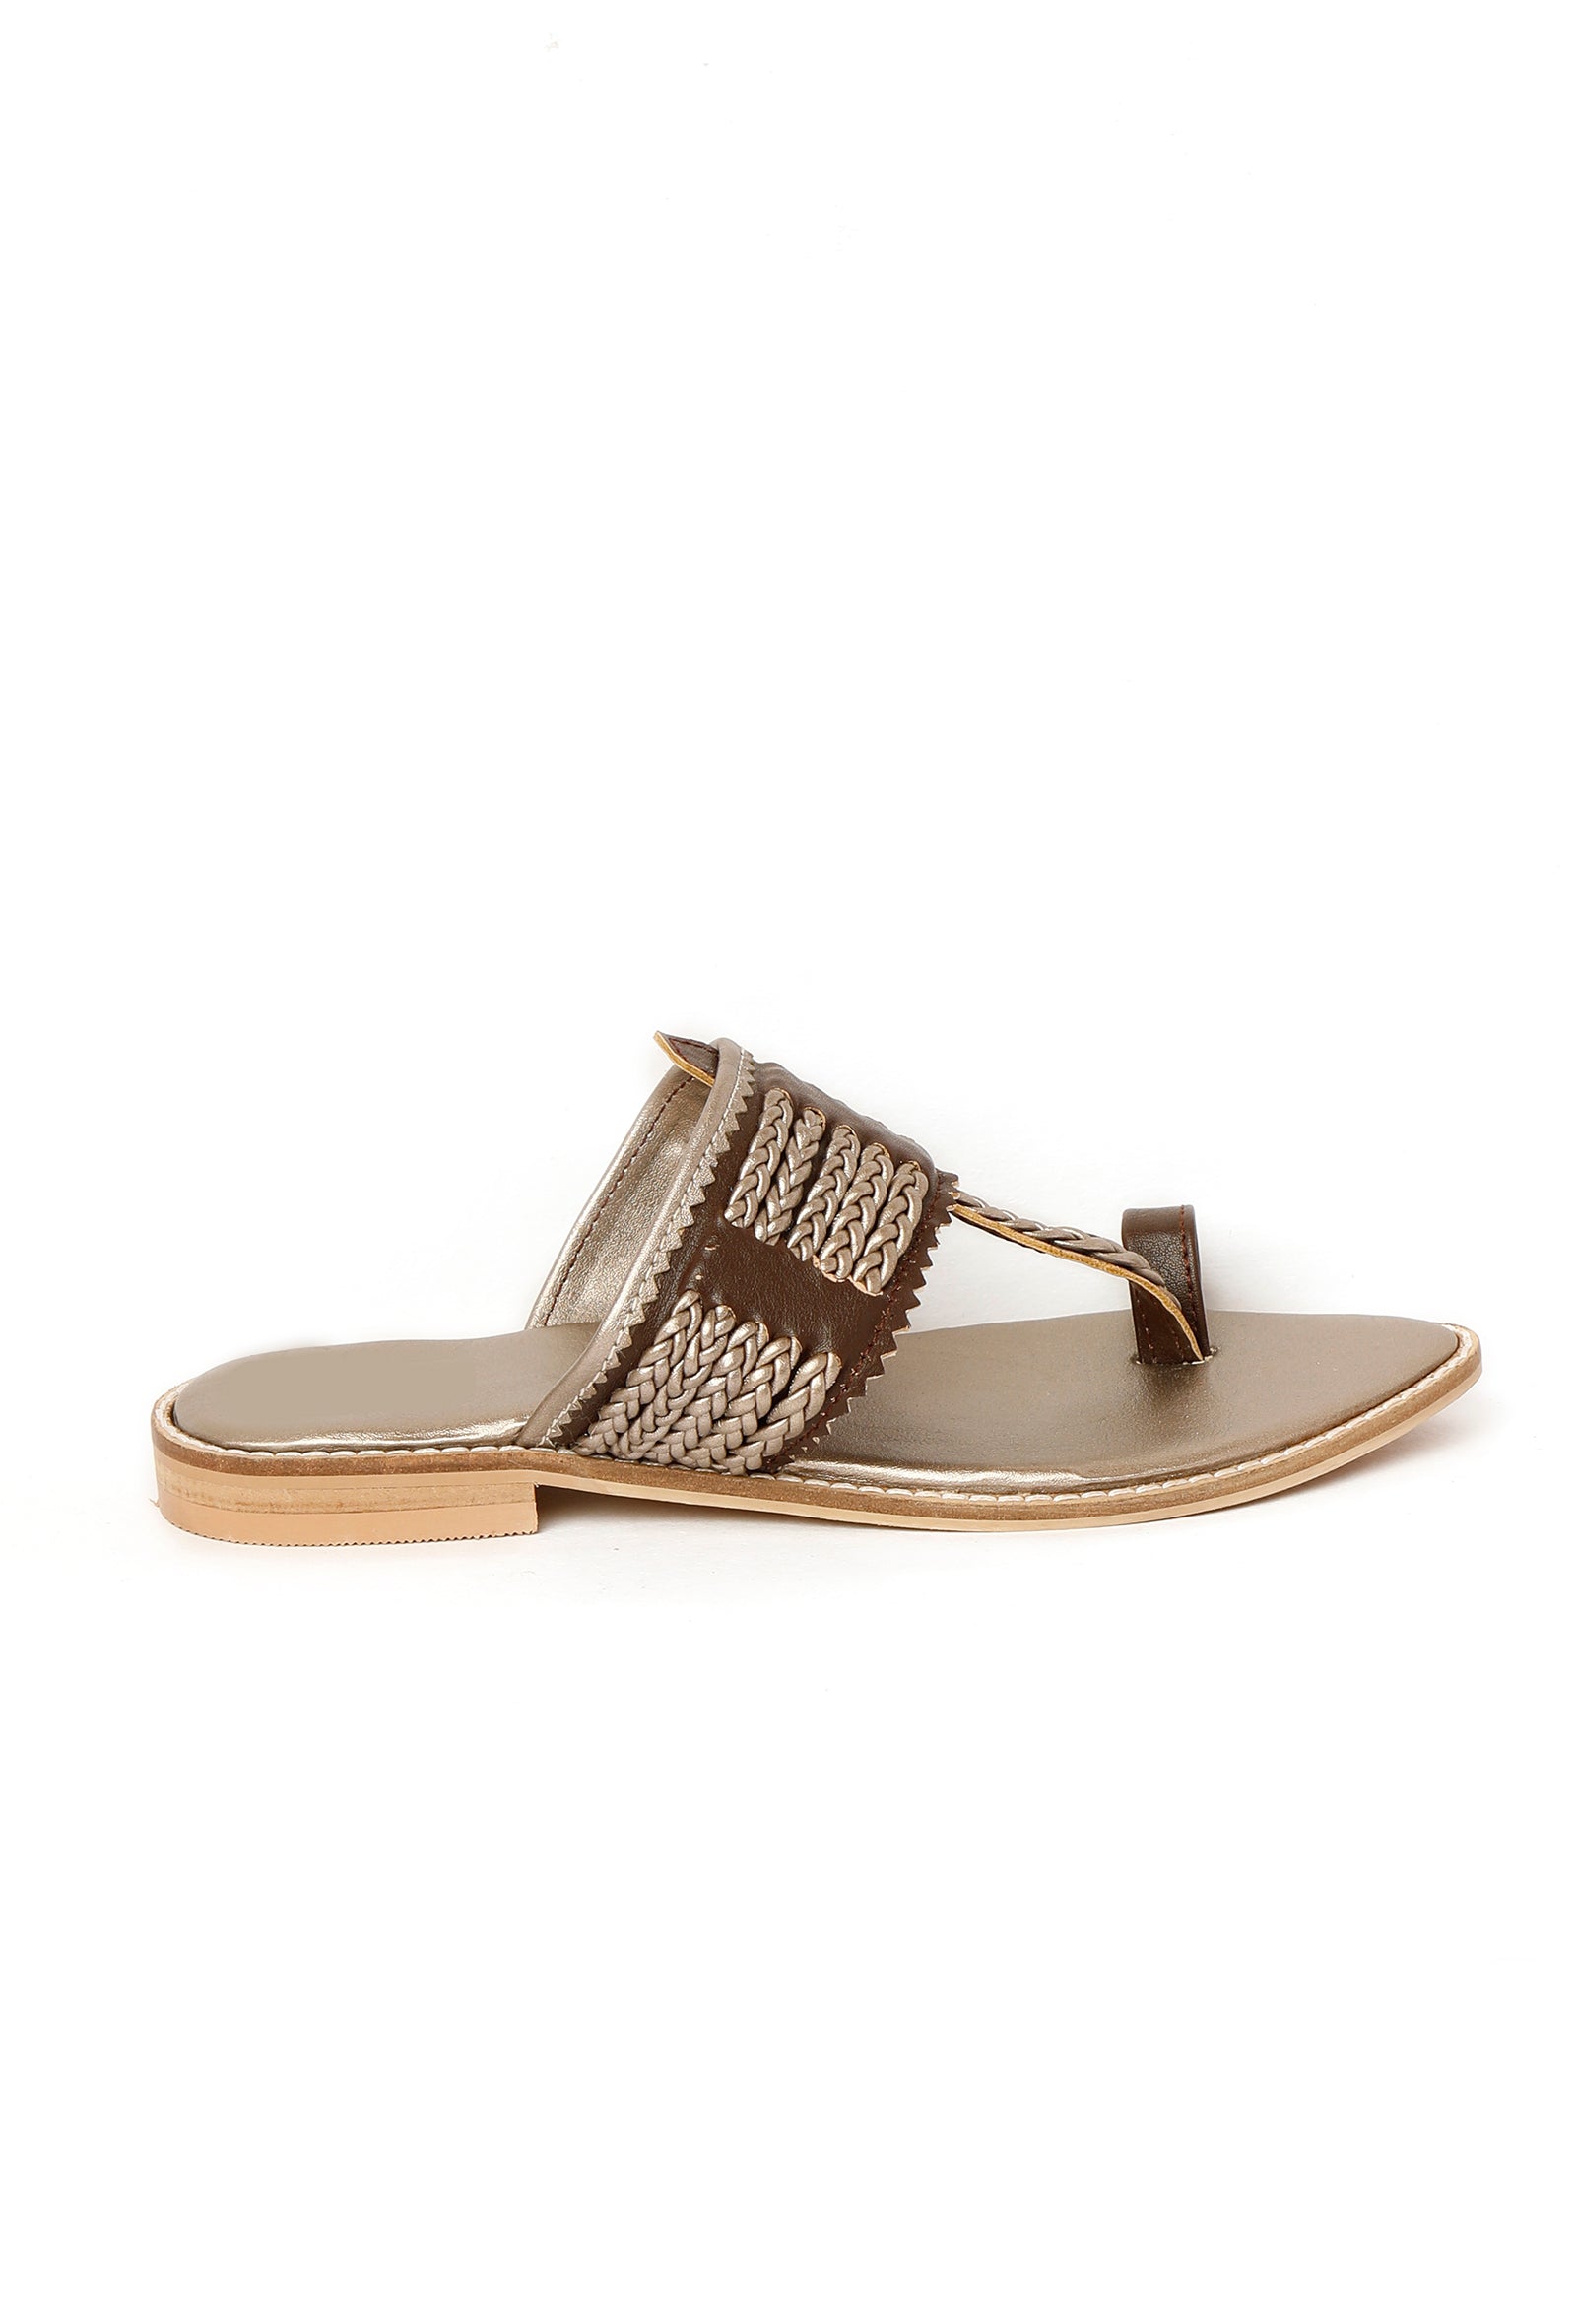 Brown & Silver Cruelty Free Leather Sandals